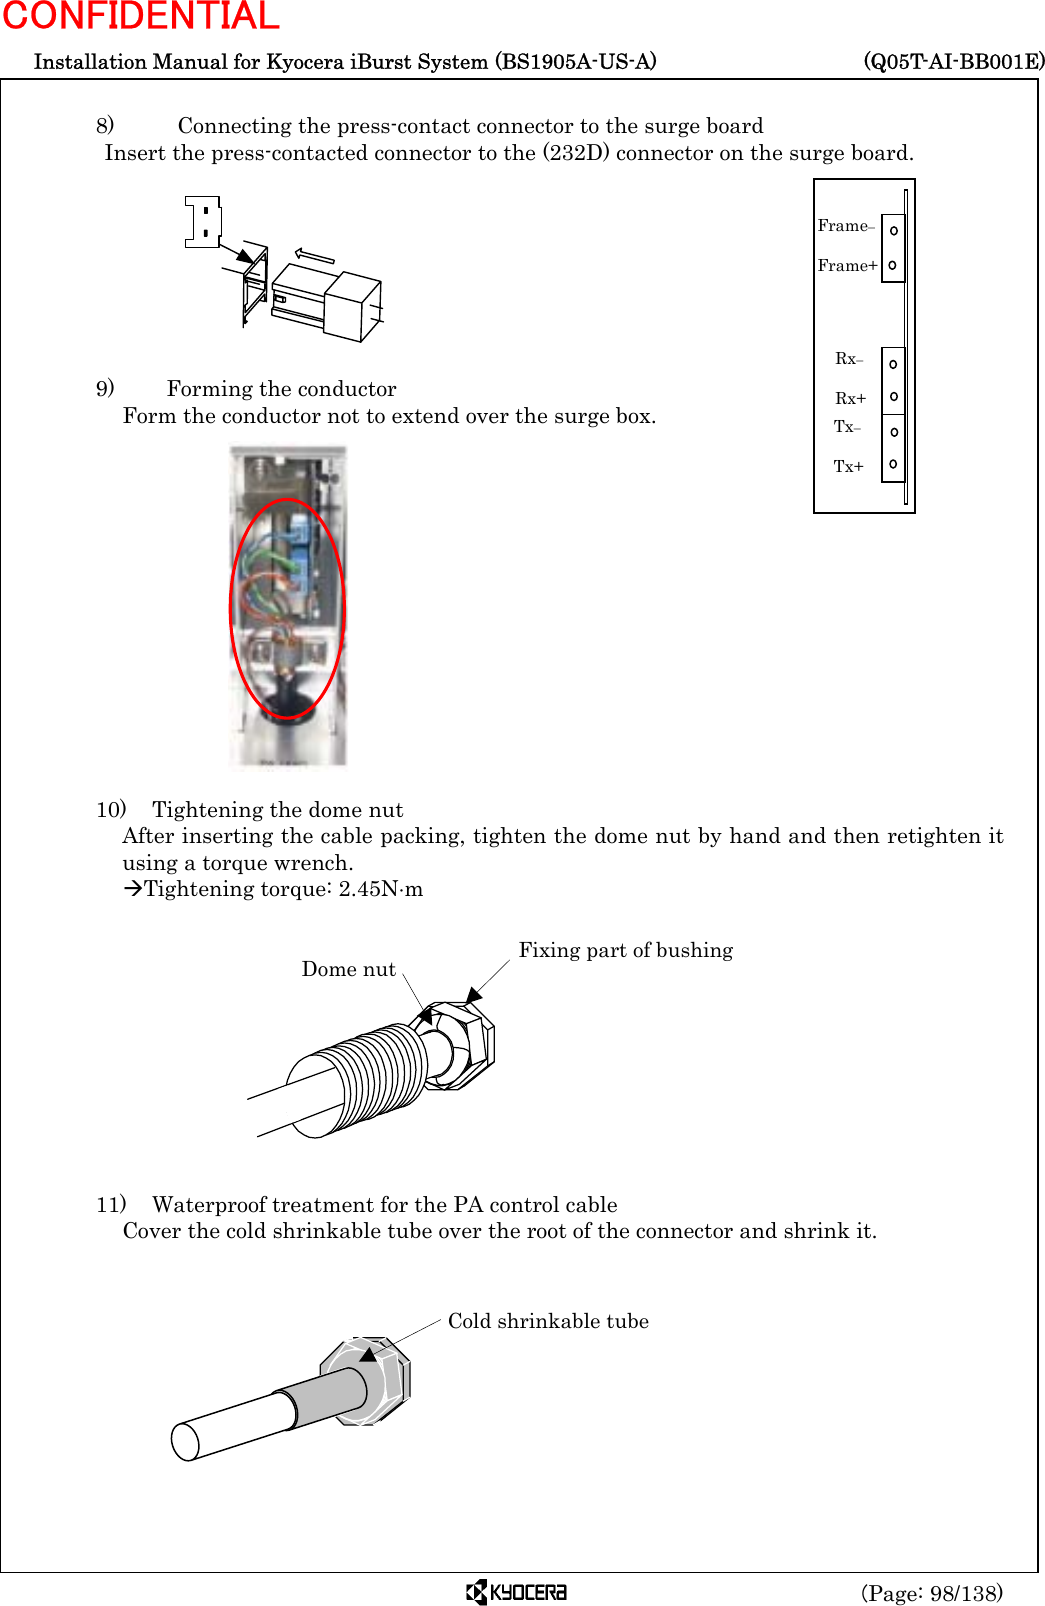  Installation Manual for Kyocera iBurst System (BS1905A-US-A)     (Q05T-AI-BB001E) (Page: 98/138) CONFIDENTIAL  8)      Connecting the press-contact connector to the surge board Insert the press-contacted connector to the (232D) connector on the surge board.         9)    Forming the conductor Form the conductor not to extend over the surge box.               10)    Tightening the dome nut After inserting the cable packing, tighten the dome nut by hand and then retighten it using a torque wrench. ÆTightening torque: 2.45N⋅m            11)    Waterproof treatment for the PA control cable Cover the cold shrinkable tube over the root of the connector and shrink it.         Dome nut  Fixing part of bushing Cold shrinkable tube Tx–  Tx+ Rx–  Rx+ Frame–  Frame+ 